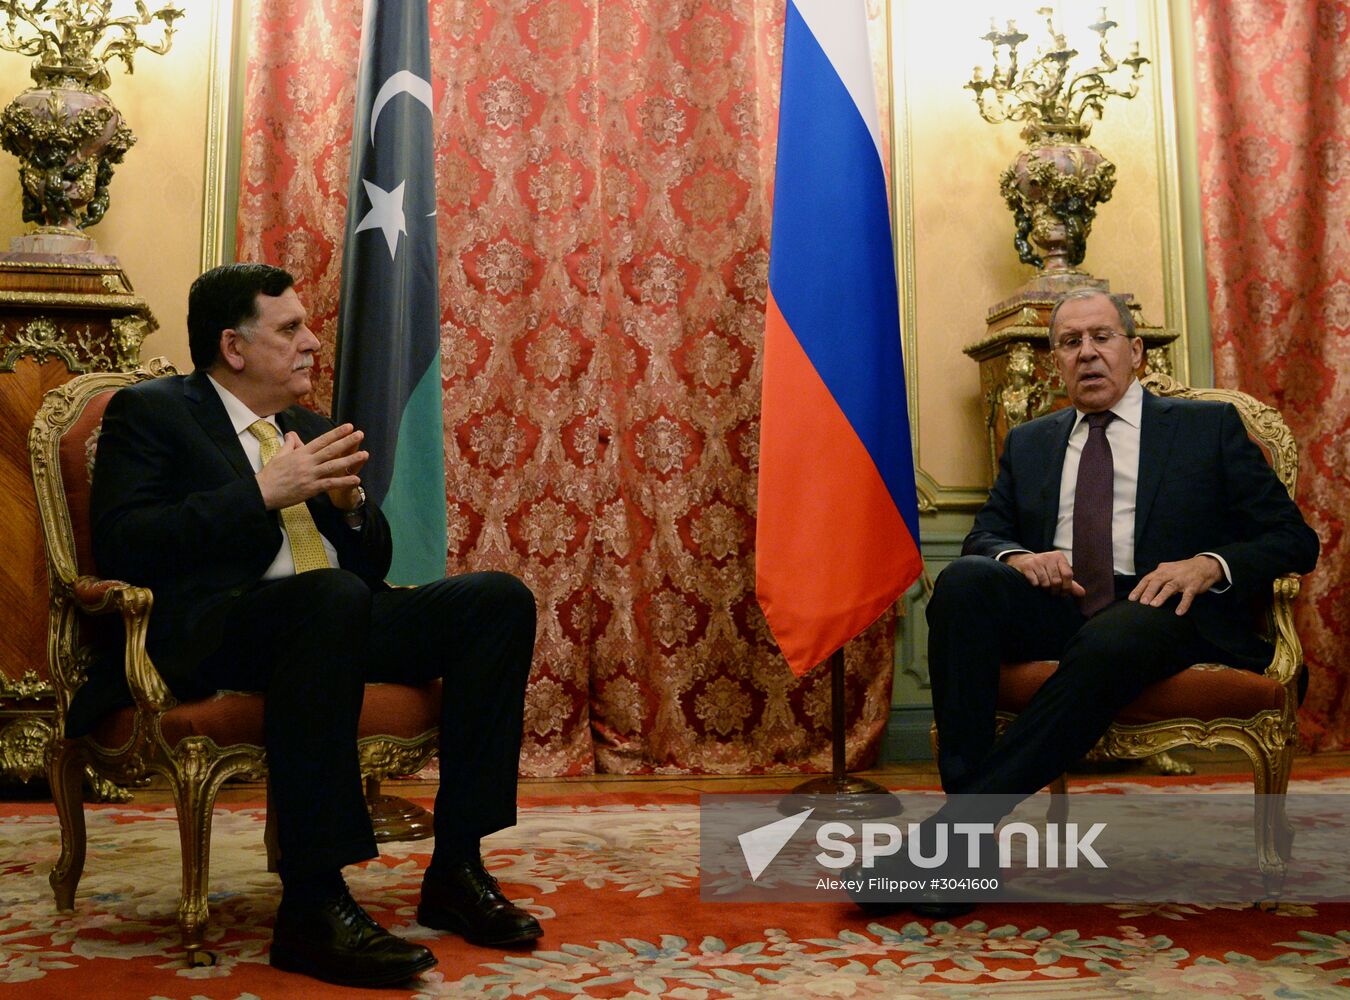 Russian Foreign Minister Sergei Lavrov meets with Libyan Prime Minister Fayiz al-Saraj